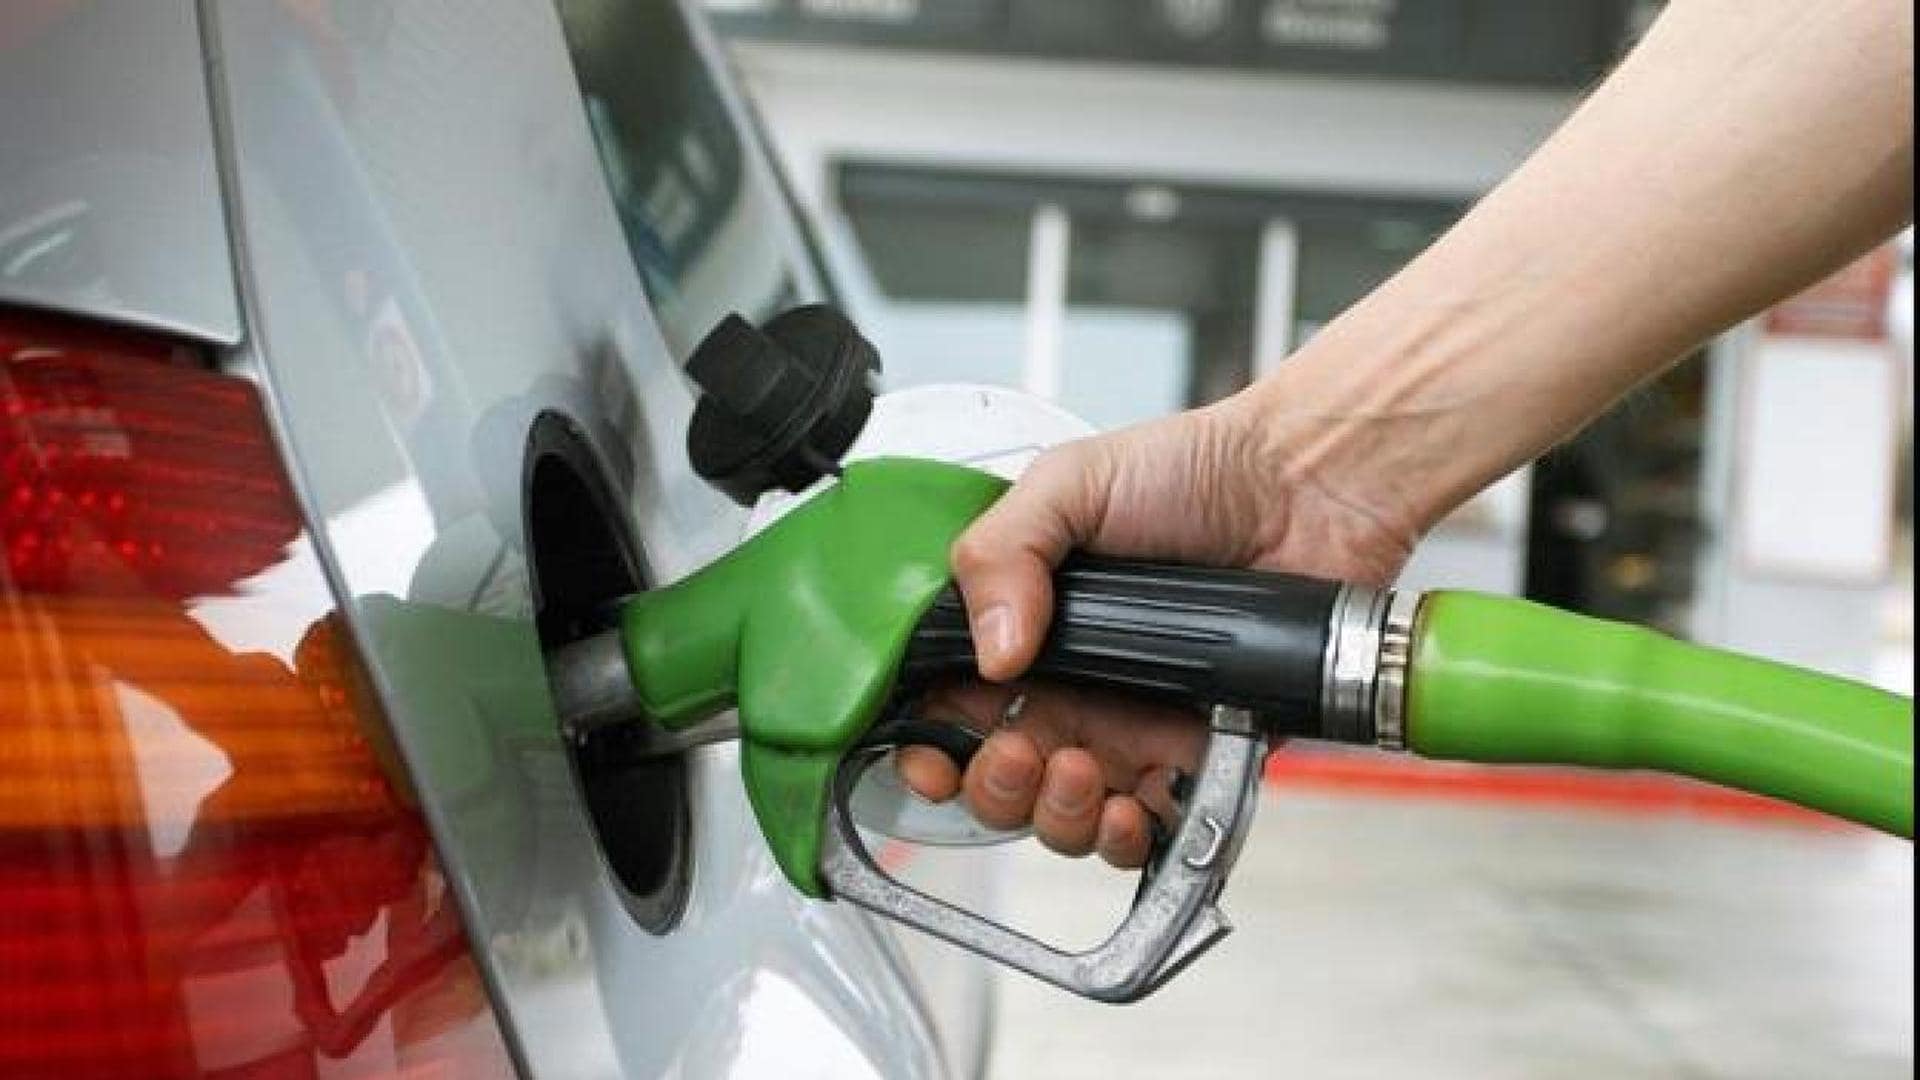 help-paying-for-gasoline-who-can-ask-for-it-and-how-to-request-it